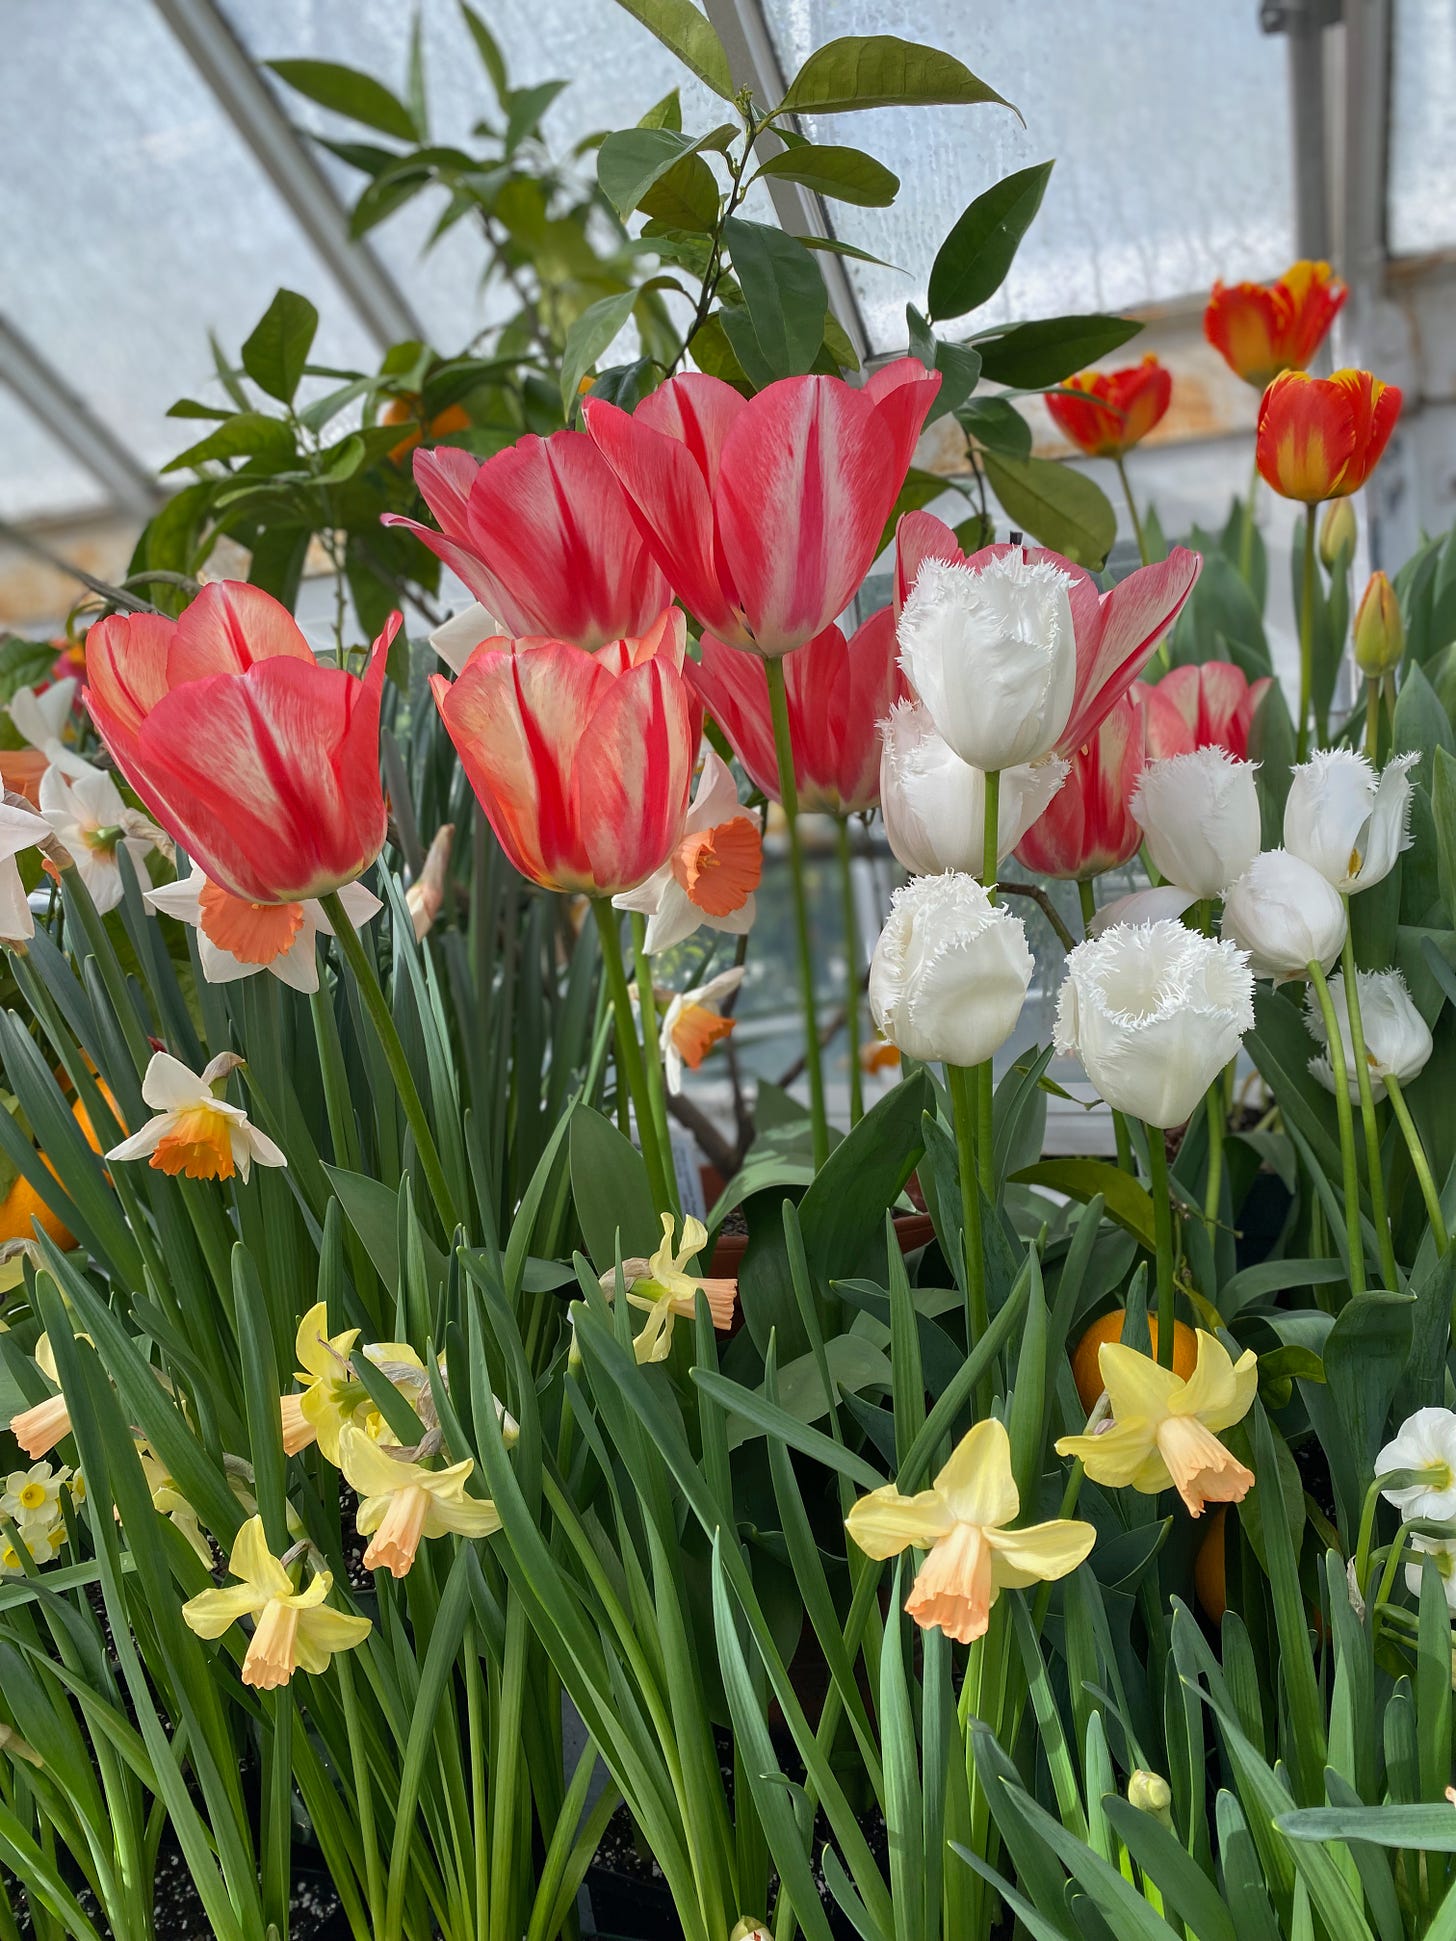 A closeup of pink and white tulips and yellow daffodils in a greenhouse.